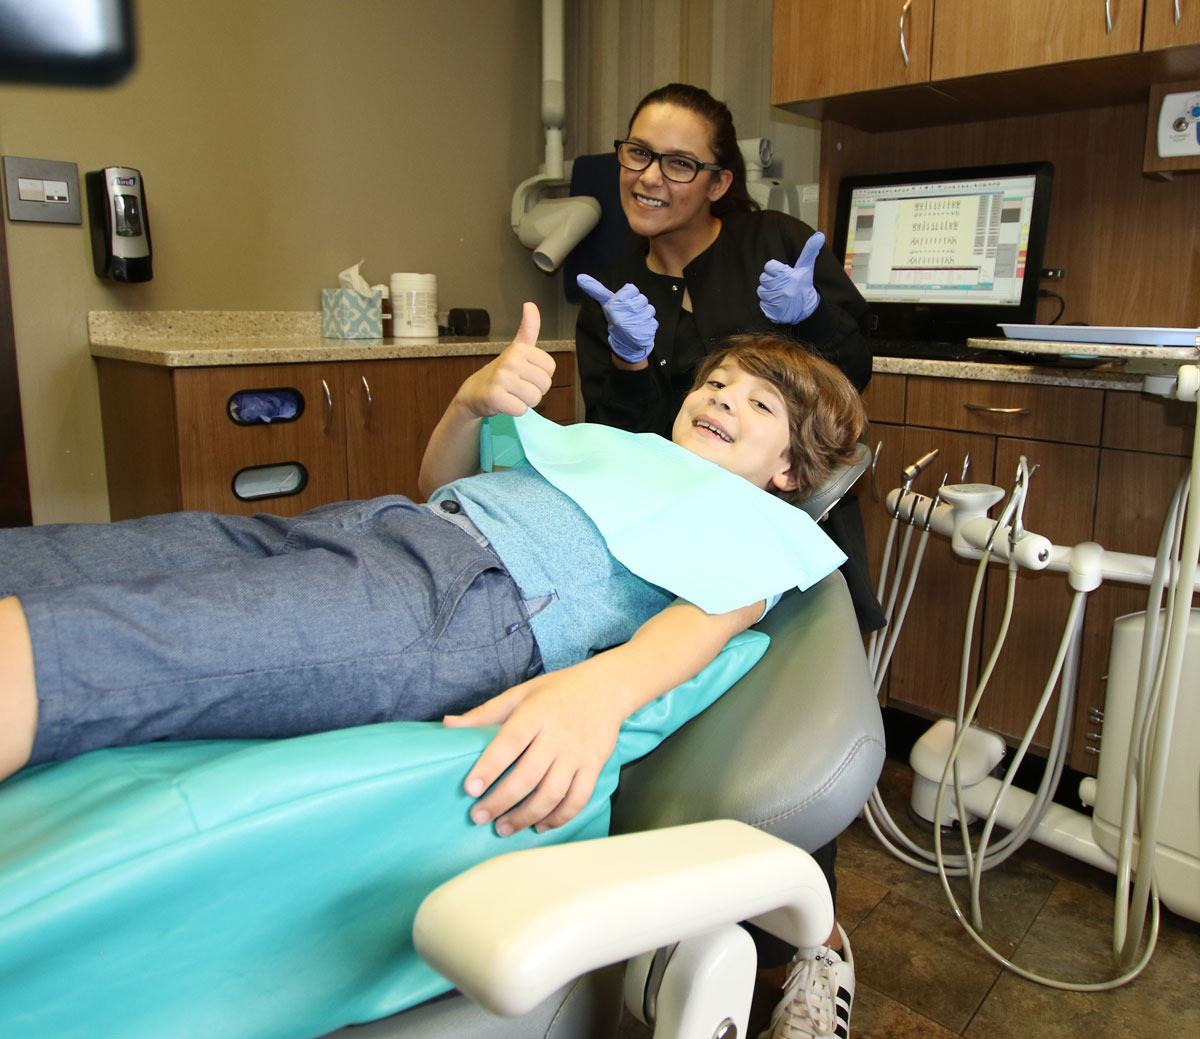 Kid giving thumbs up after a dental exam at Grins and Giggles Family Dentistry in Spokane Valley, WA